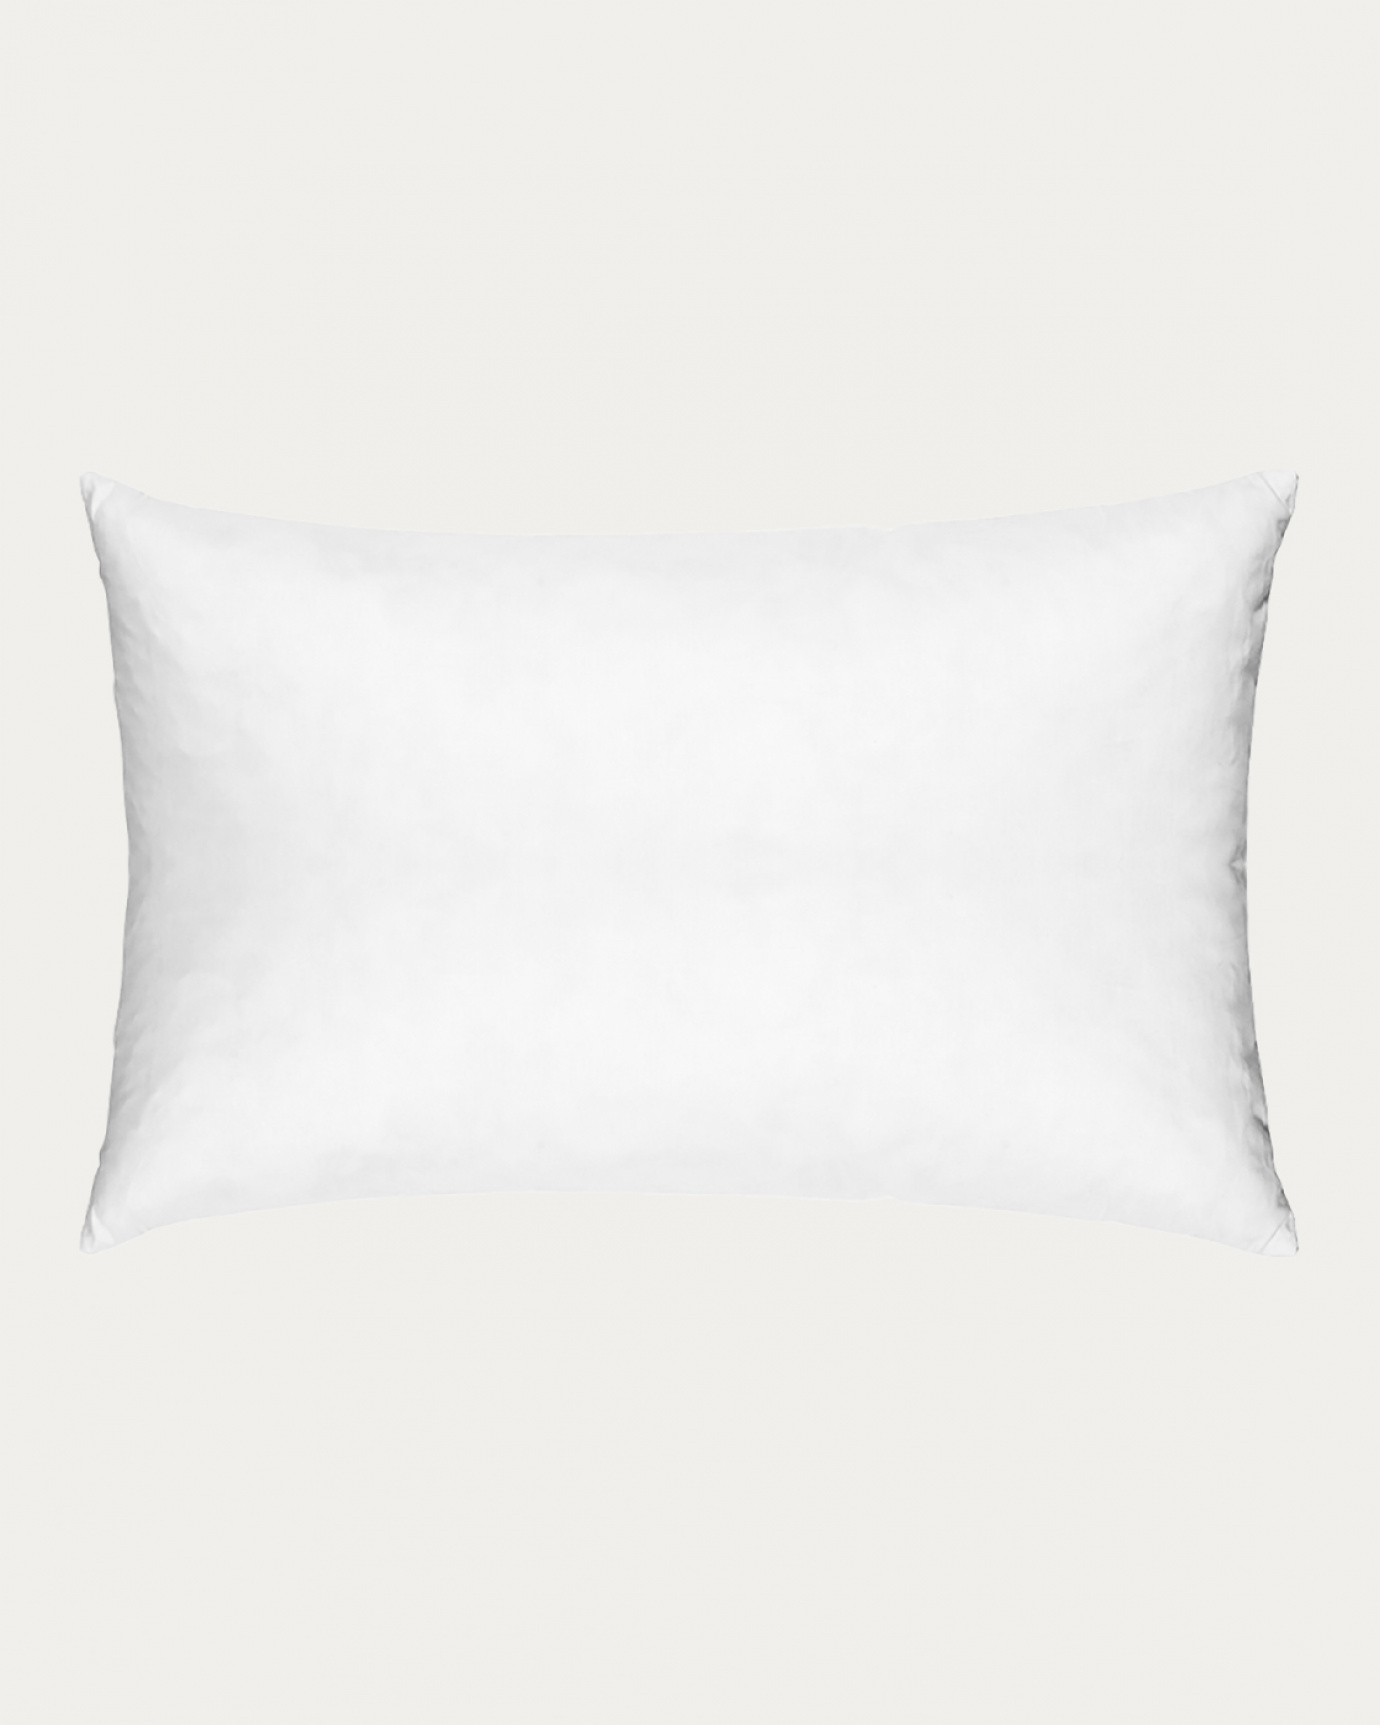 Product image white SYNTHETIC cushion insert made of cotton with polyester filling from LINUM DESIGN. Size 40x60 cm.